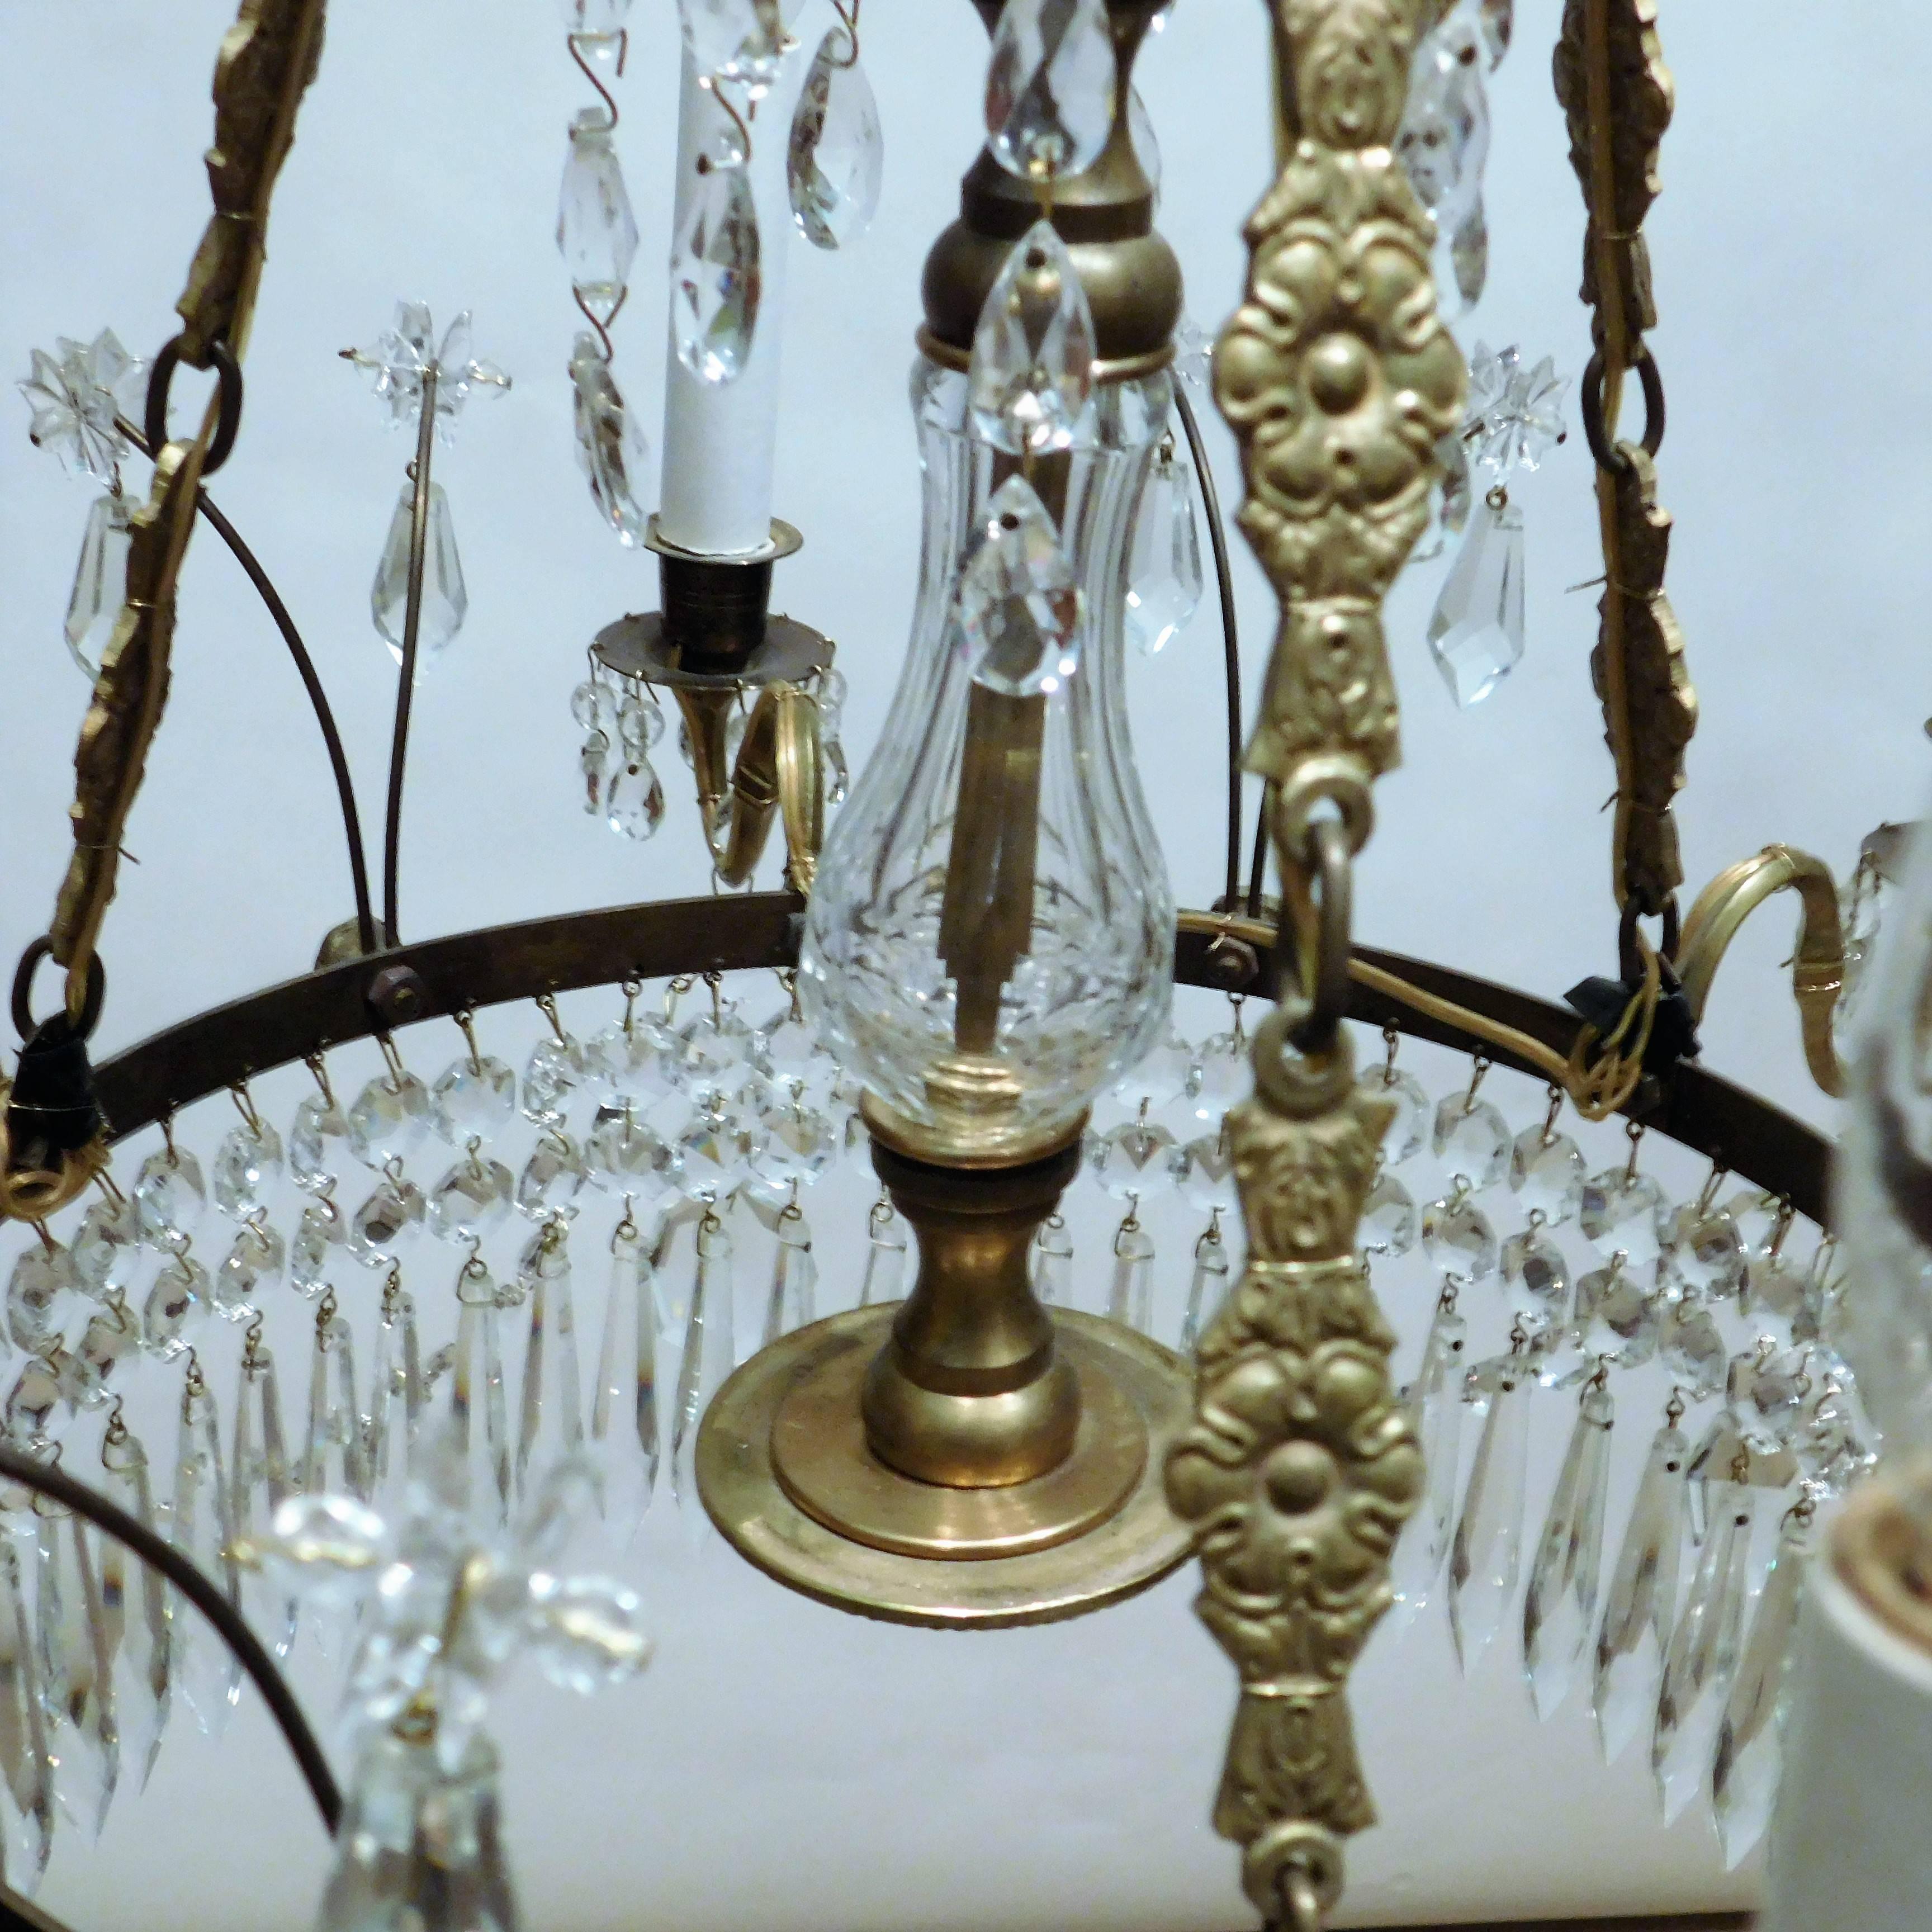 20th Century Neoclassical Six-Light Gilt Brass and Crystal Chandelier, Baltic Area